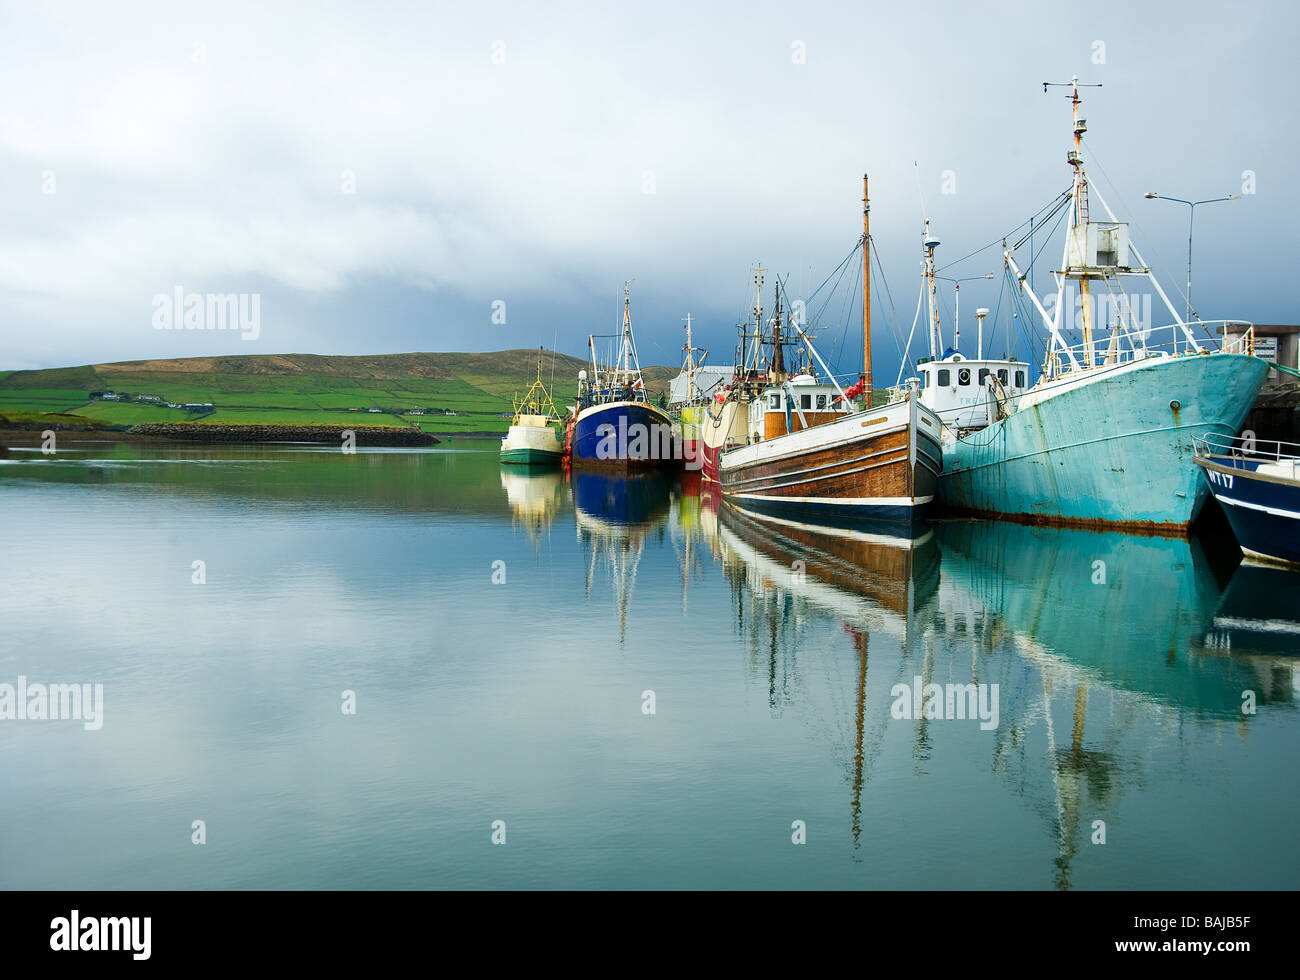 Reflections of ships in the small town of Dingle Bay, Dingle Bay Peninsula, County Kerry, Ireland Stock Photo